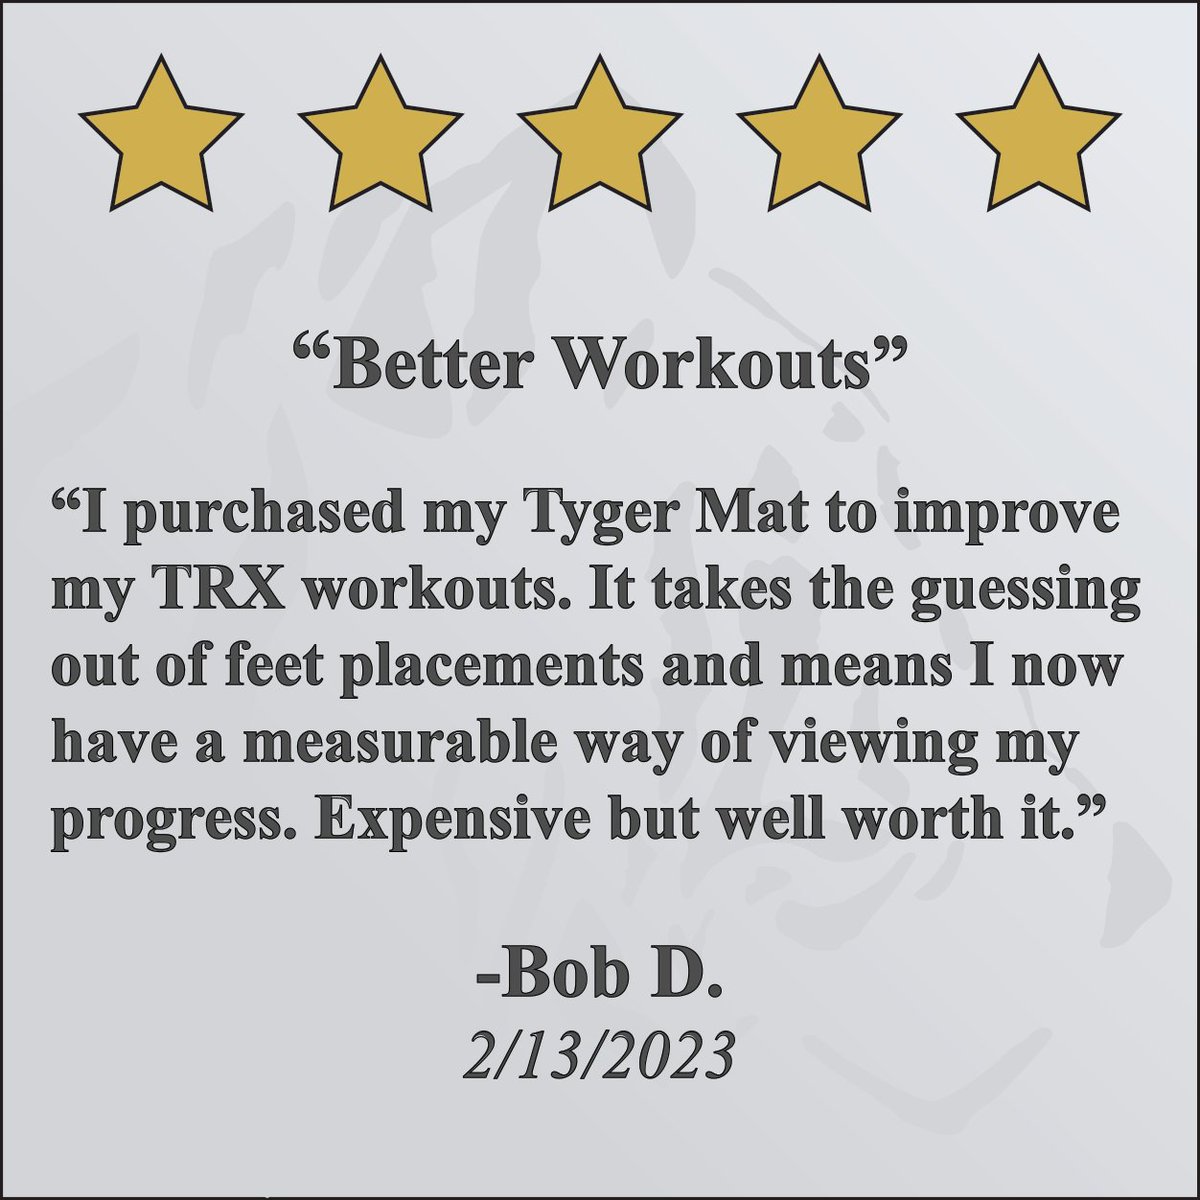 The Hits Keep Coming! 

To see more reviews and find more information on the Tyger Mat, just go to TygerMat.com

#tygermat  #TRX #trxtraining #suspensiontrainer #trxexercises #trxsuspensiontraining #suspensiontraining #trxfitness #trxsuspensiontrainer